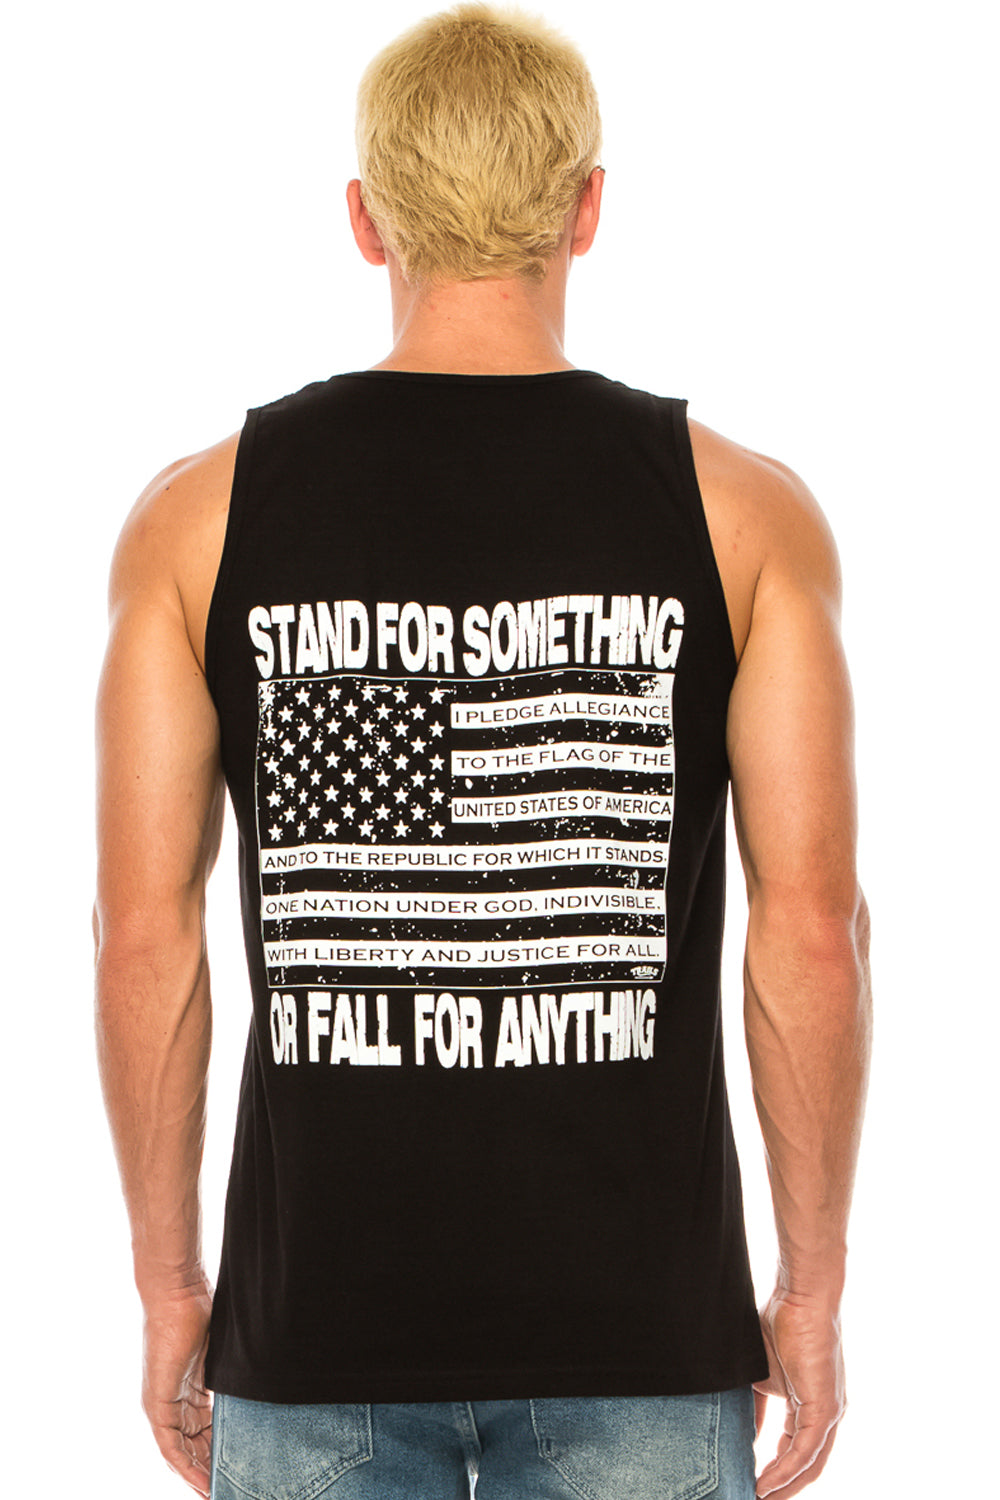 STAND FOR SOMETHING TANK TOP - Trailsclothing.com